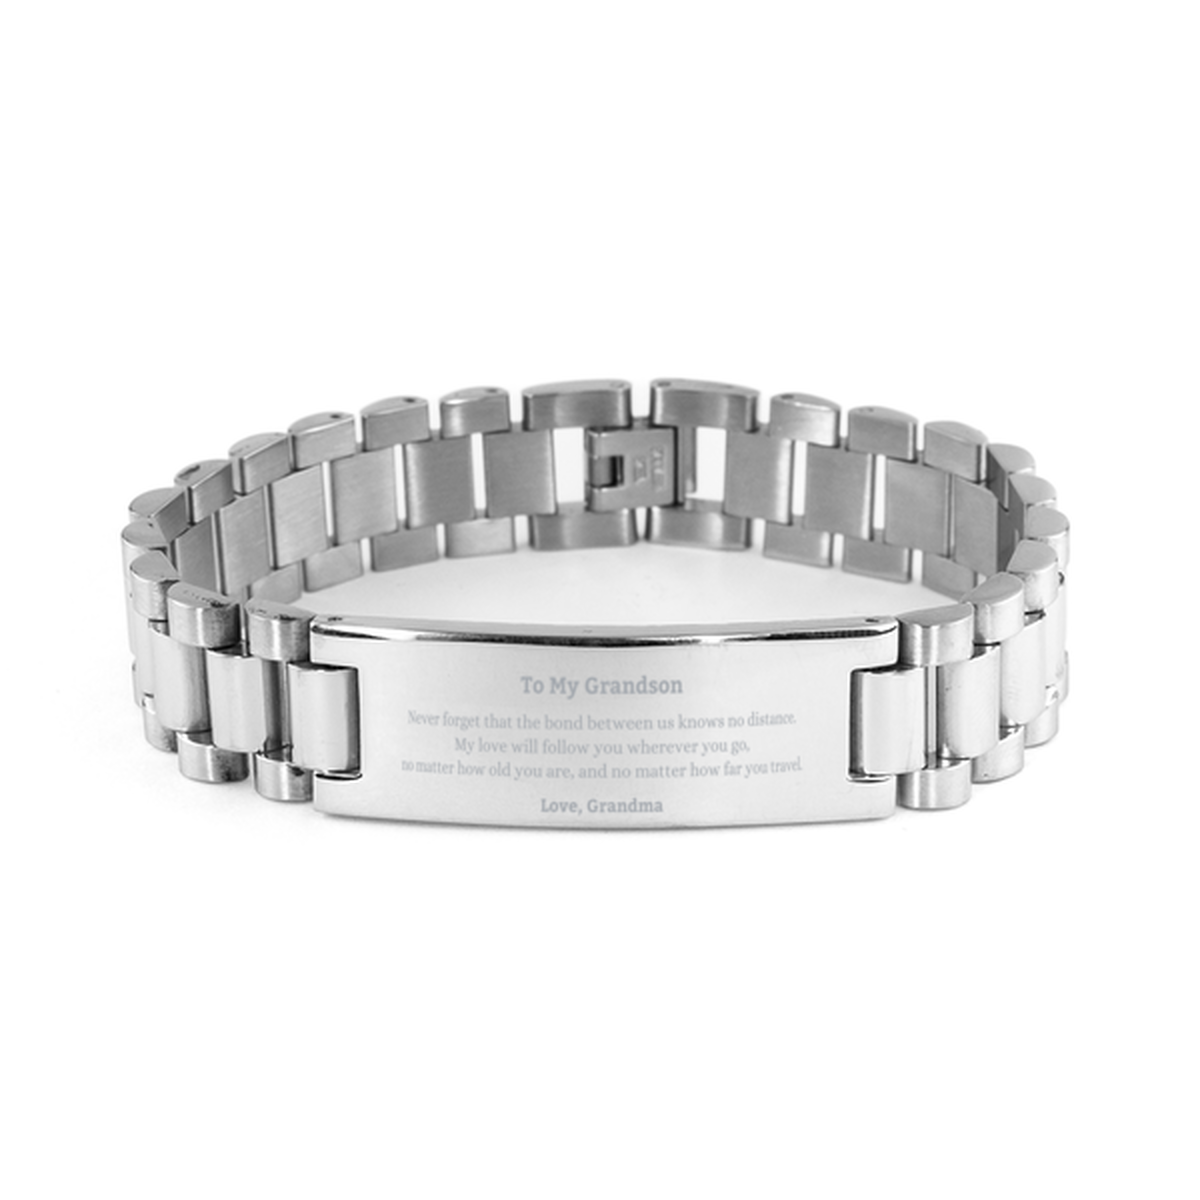 Grandson Birthday Gifts from Grandma, Adjustable Ladder Stainless Steel Bracelet for Grandson Christmas Graduation Unique Gifts Grandson Never forget that the bond between us knows no distance. Love, Grandma